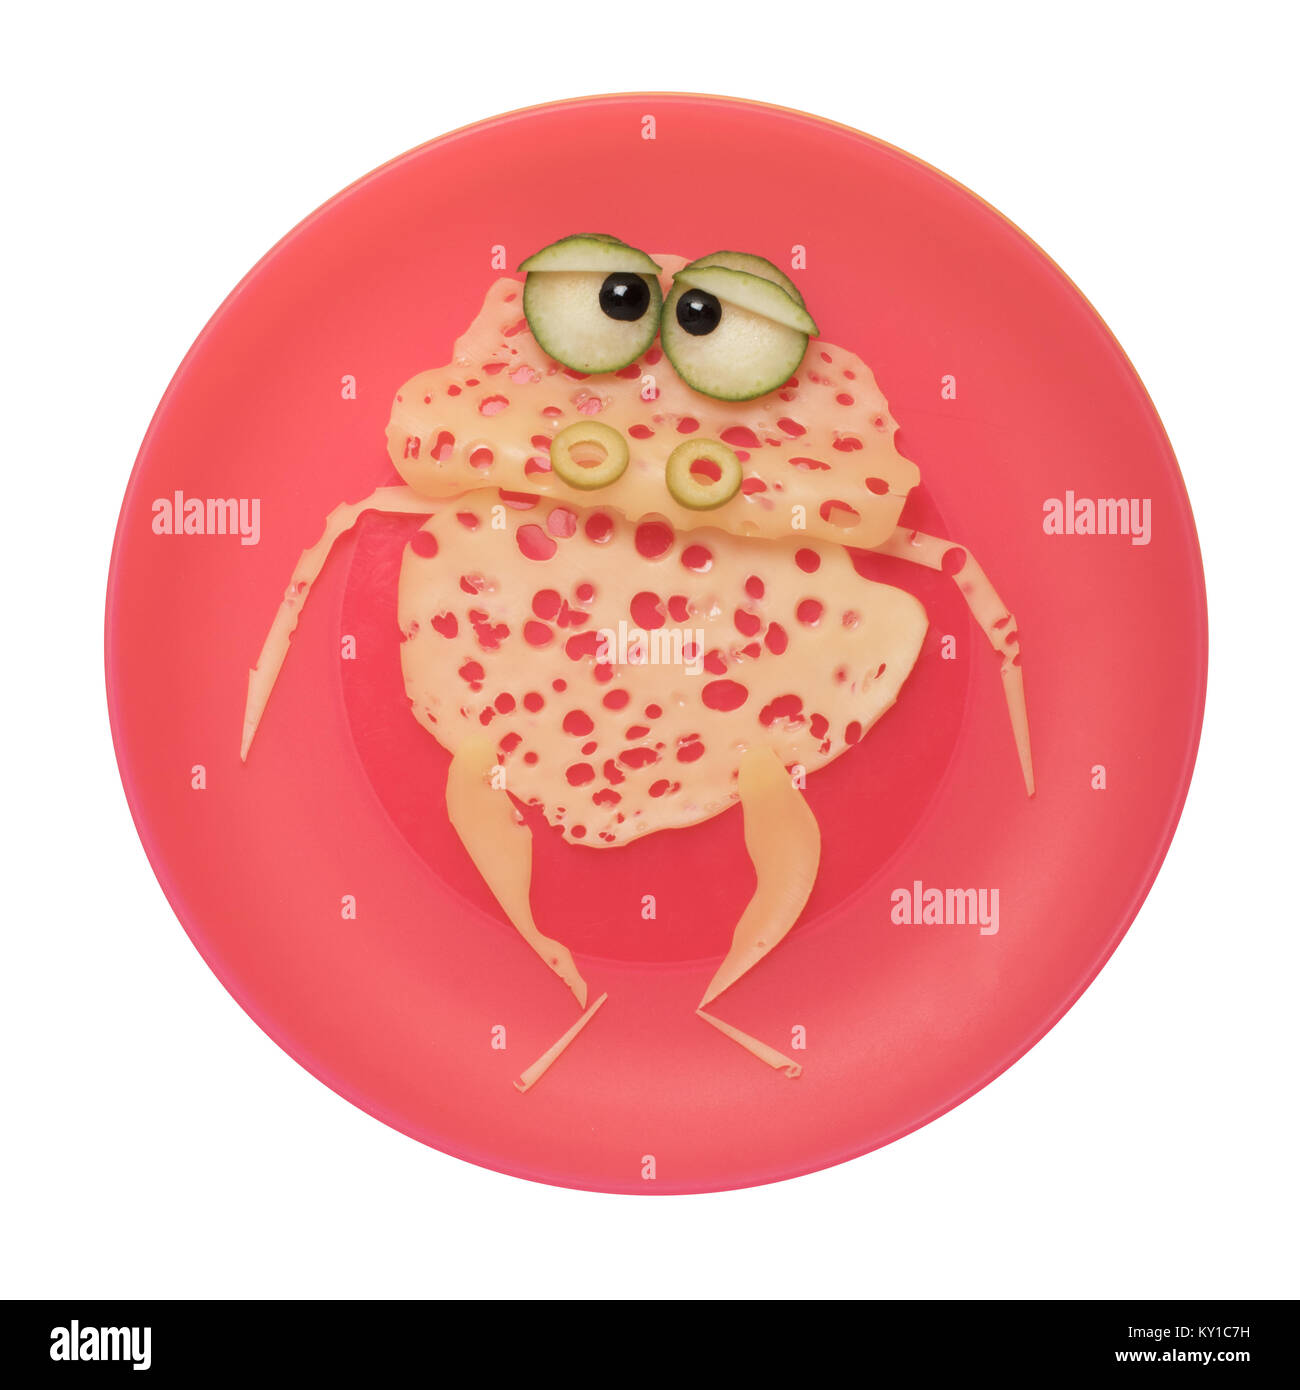 Creative idea of making frog with cheese Stock Photo